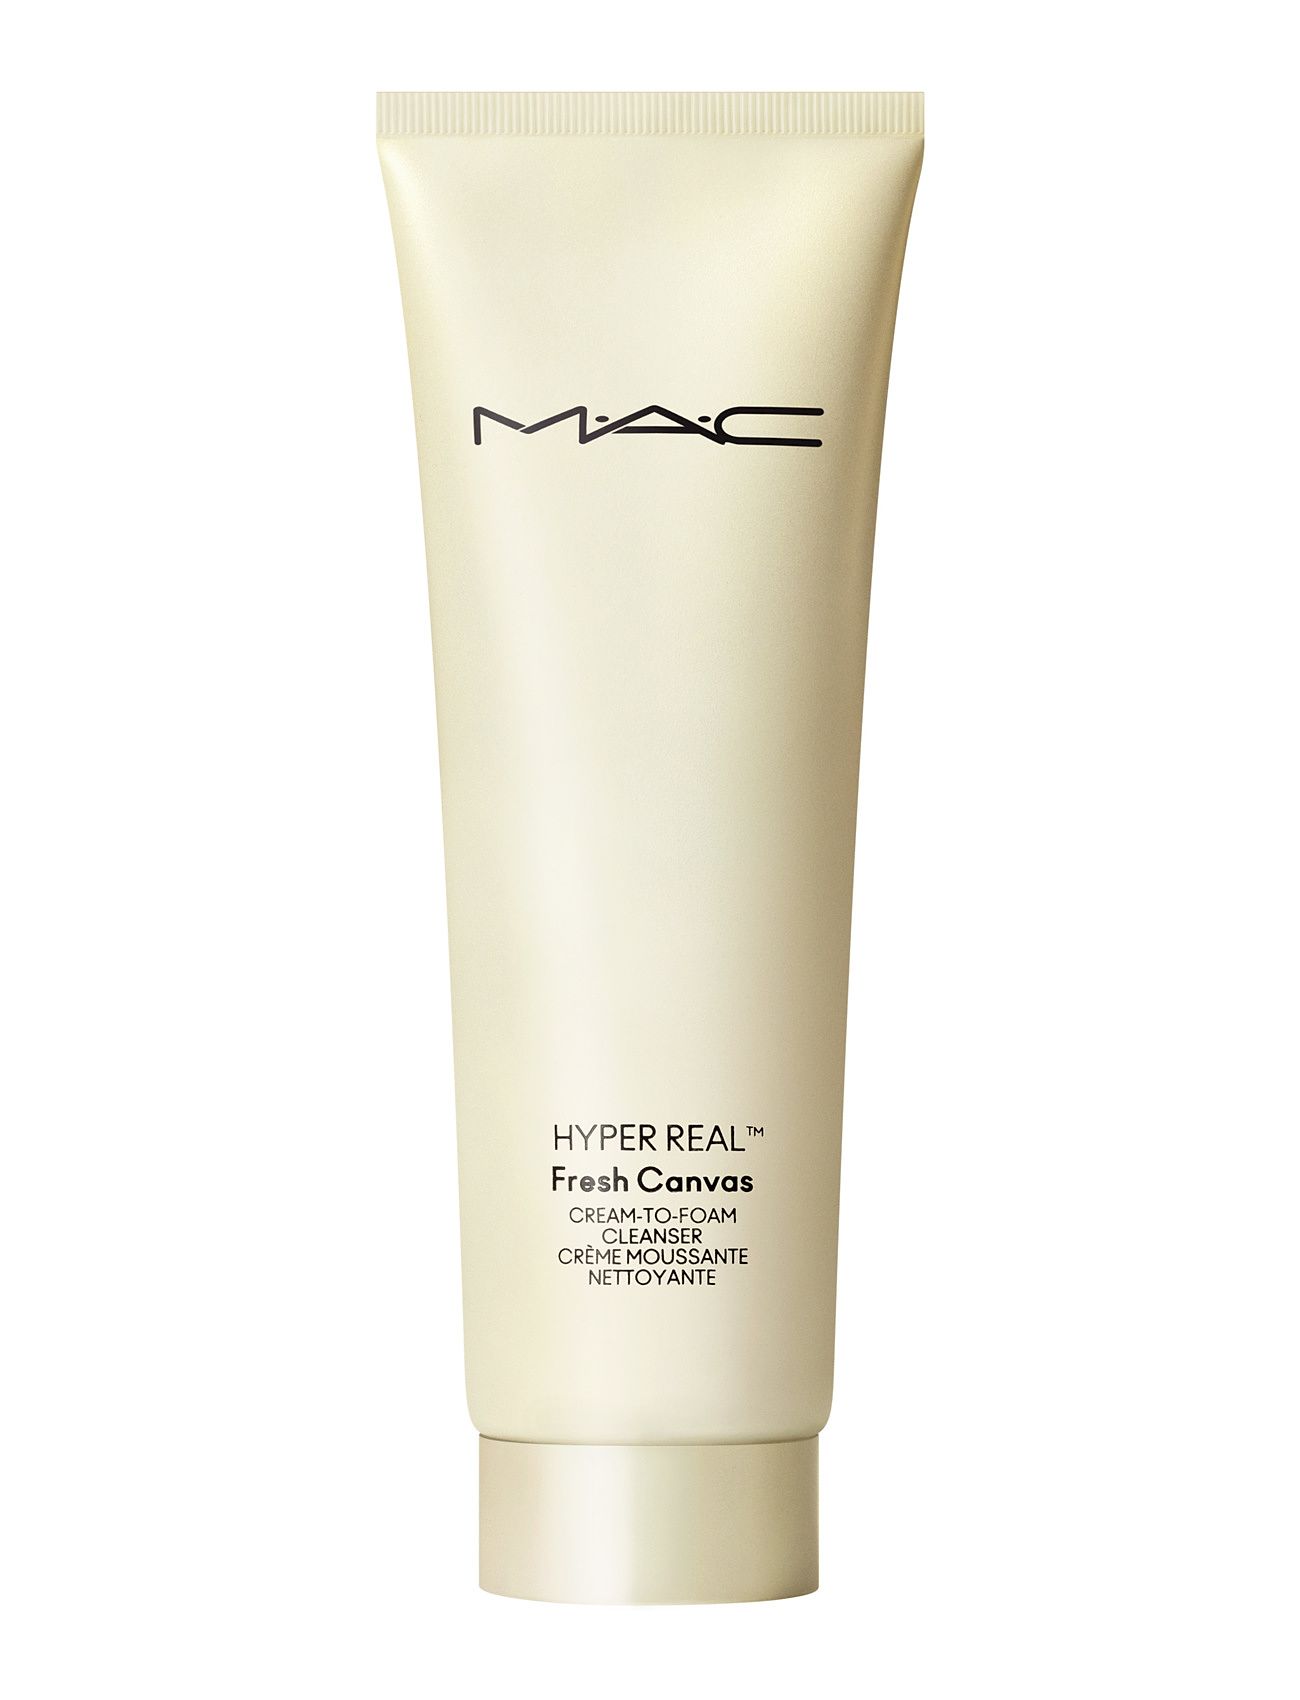 Hyper Real Fresh Cream-To-Fam Cleanser - 125Ml Beauty Women Skin Care Face Cleansers Mousse Cleanser Nude MAC